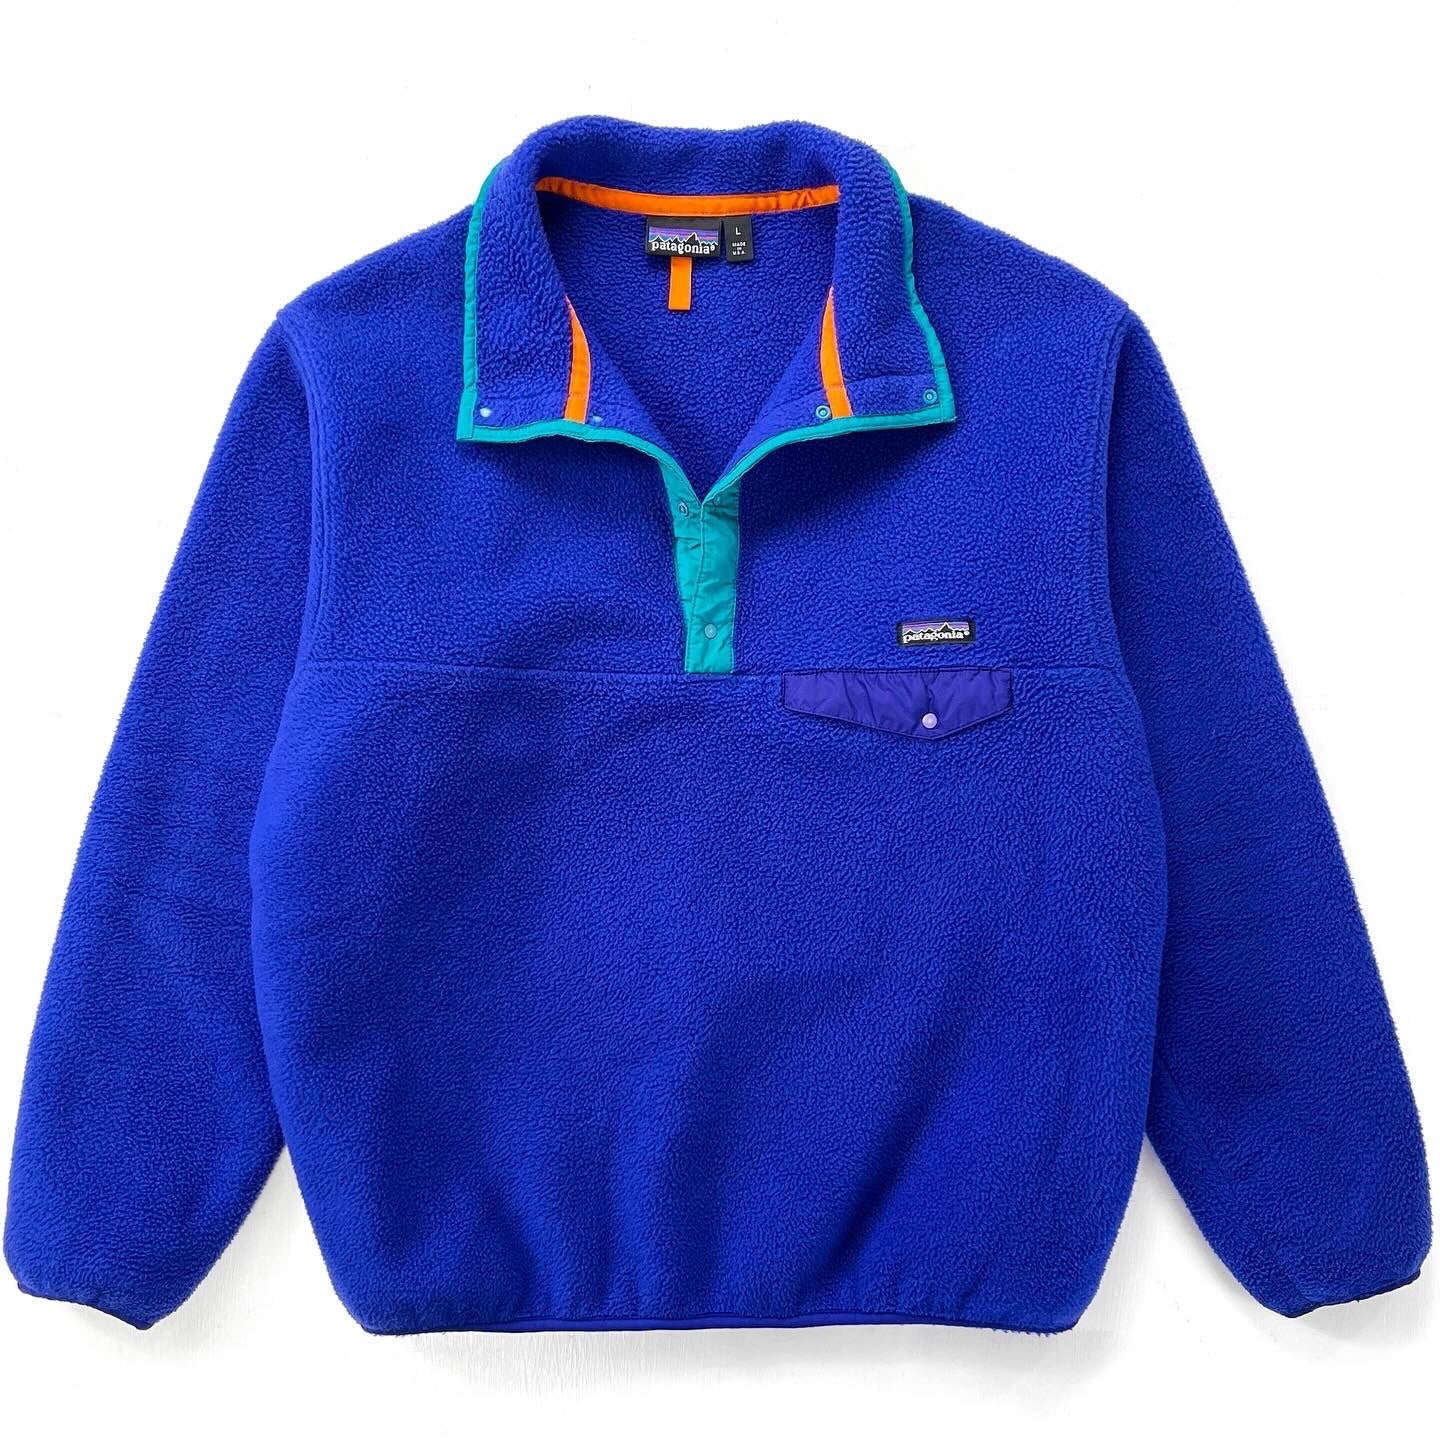 1991 Patagonia Made In The U.S.A. Synchilla Snap-T, Cobalt (L)